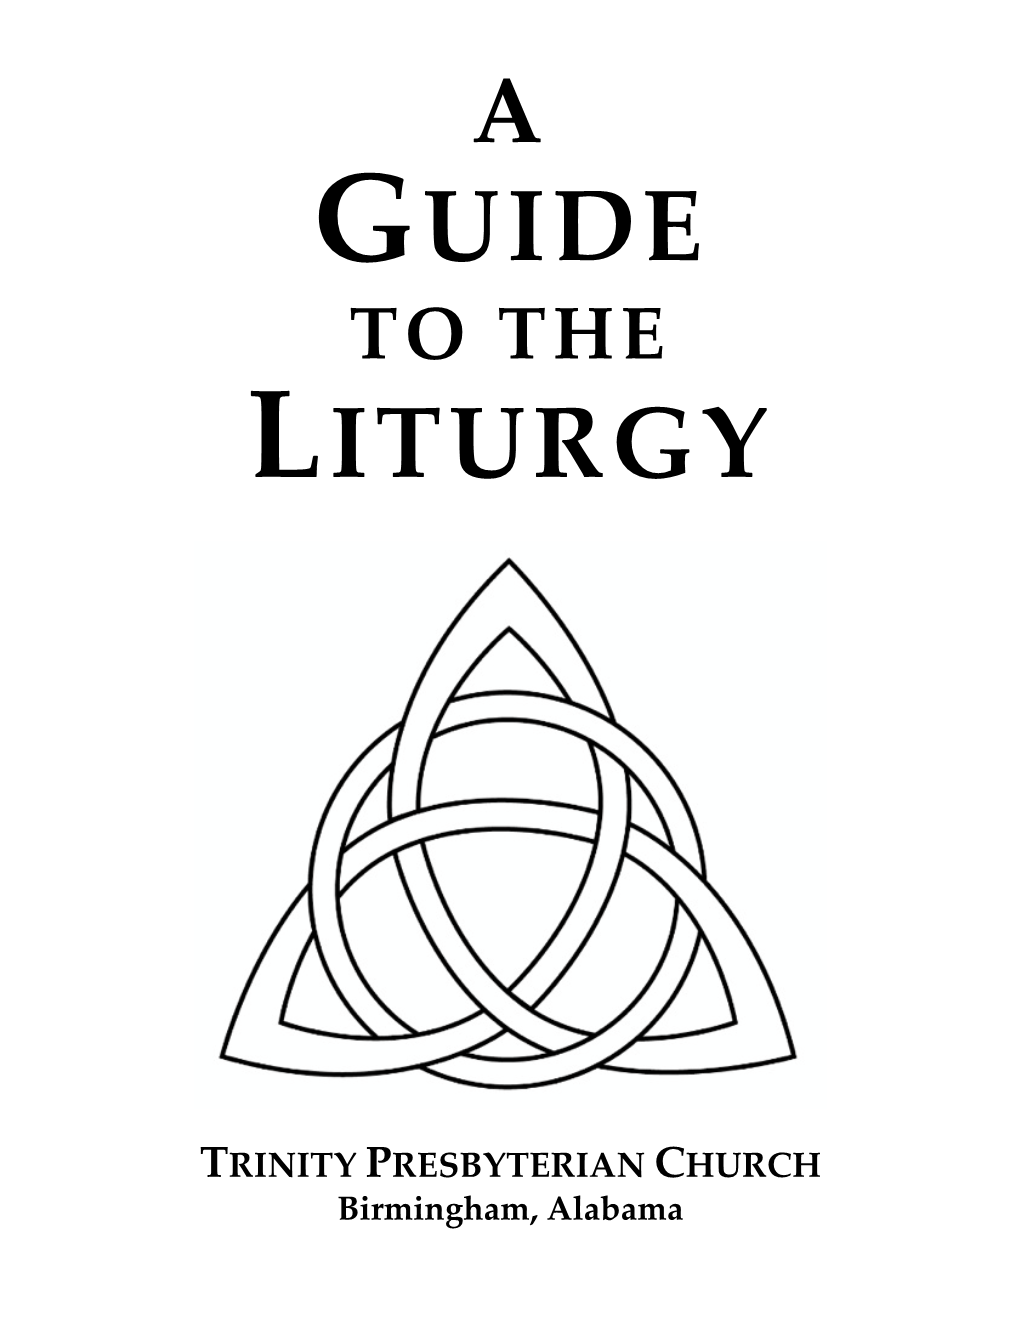 TPC Guide to the Liturgy-Letter Size